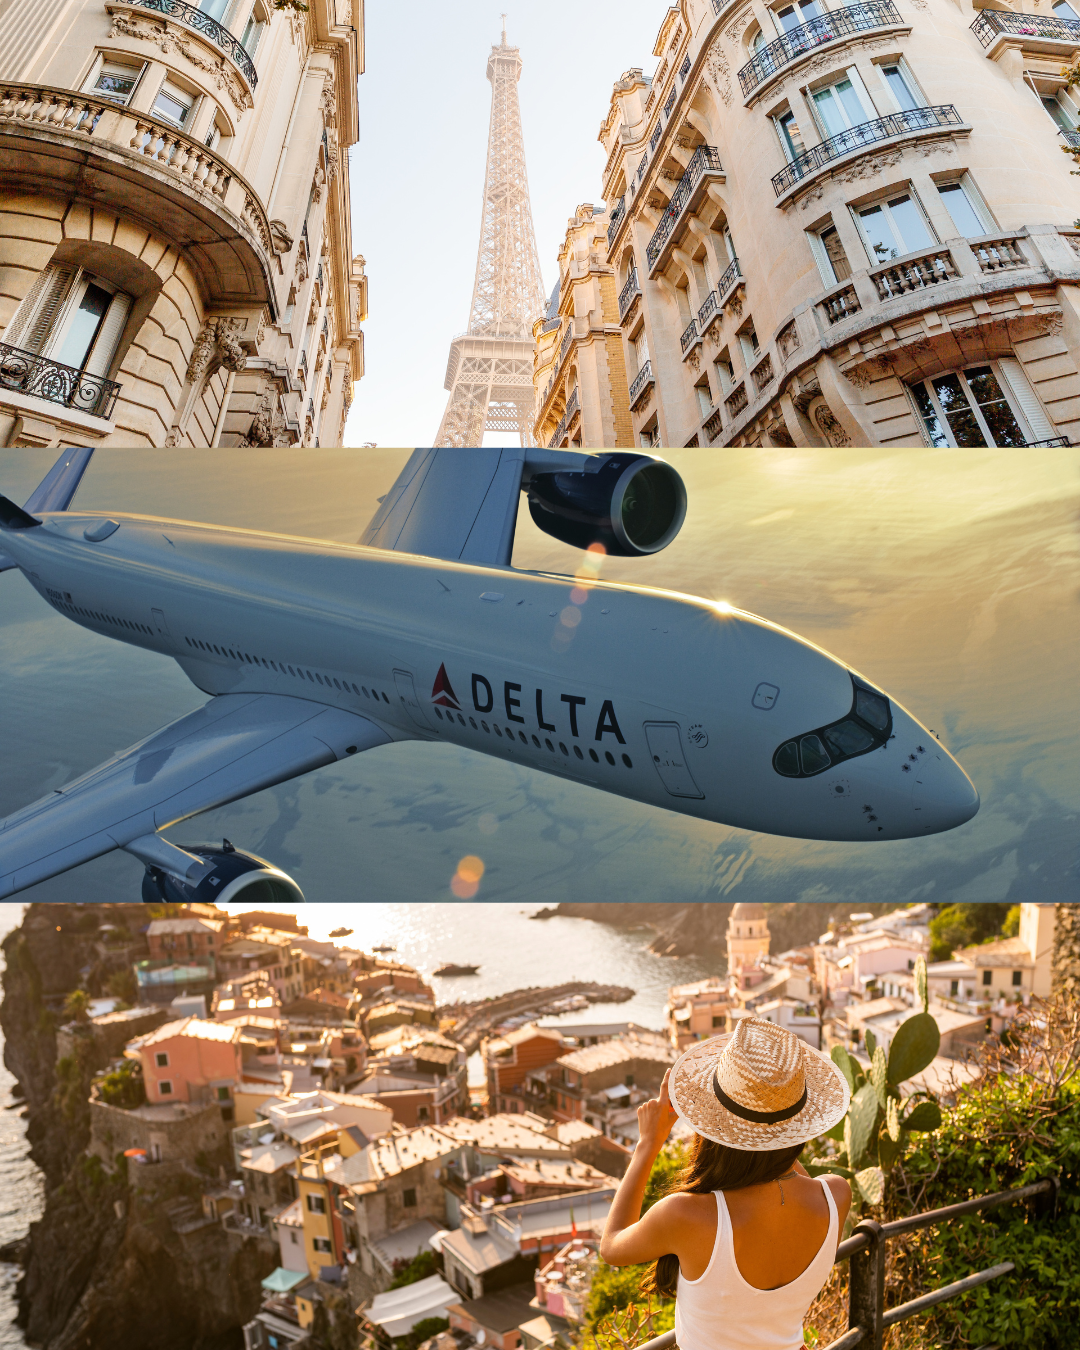 Composite image of three things. On top, a city view of Paris, France with the Eiffel Tower,. In the middle, a Delta plane in the sky. On the bottom is an image of coastal Italy with a woman looking out toward the ocean ahead